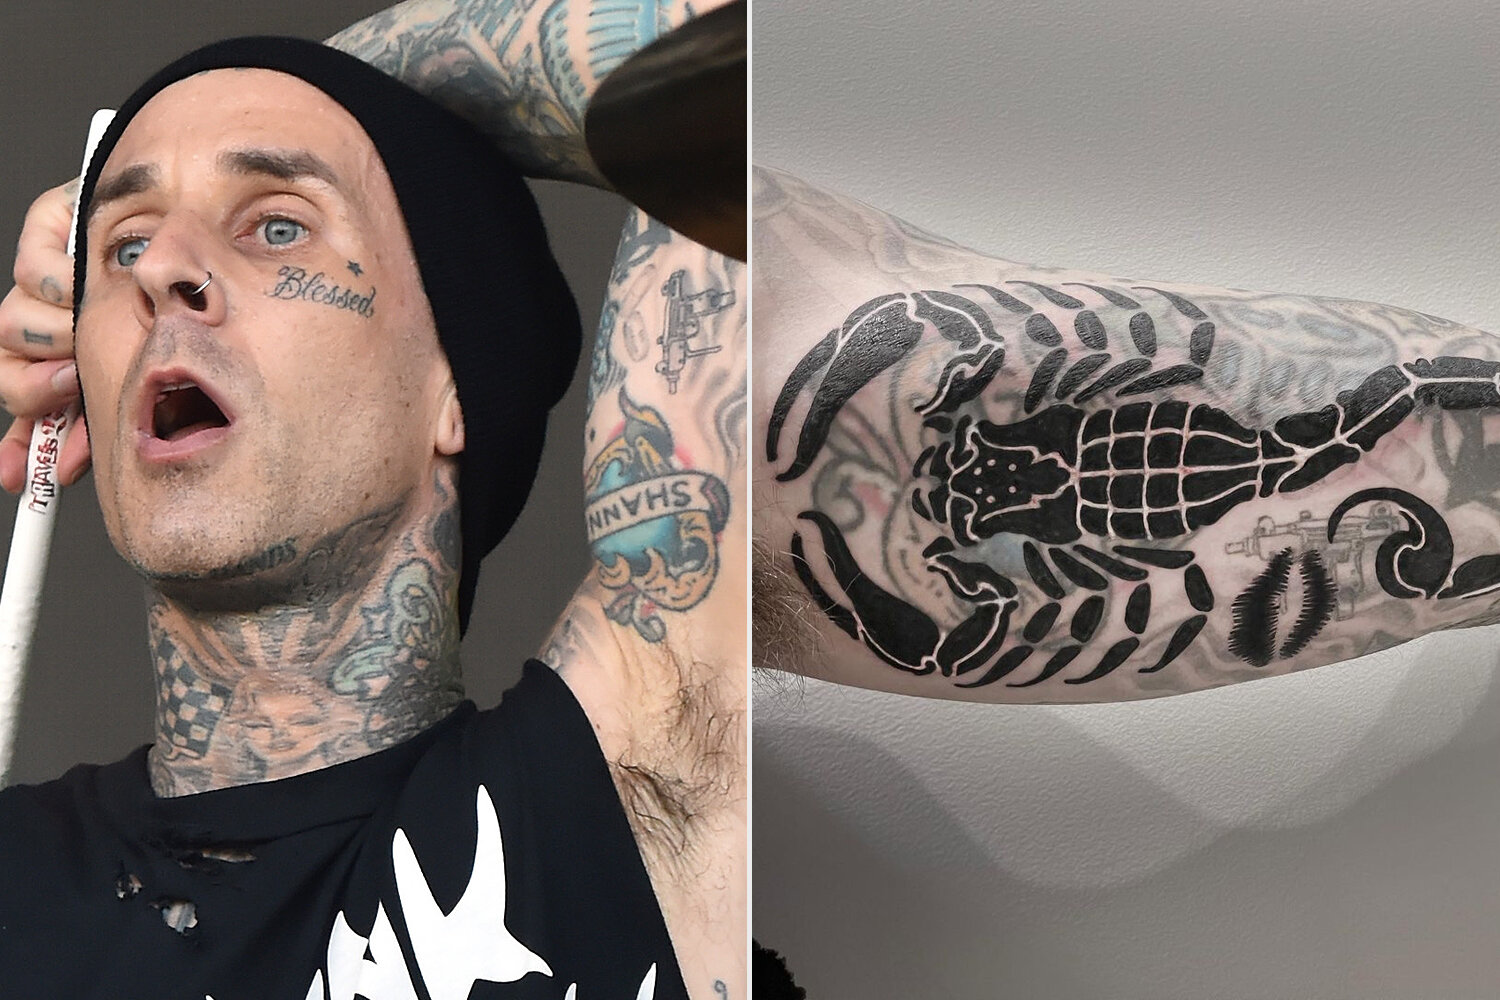 Travis Barker recently covered a scorpion tattoo over his ex-wife Shanna Moakler's name